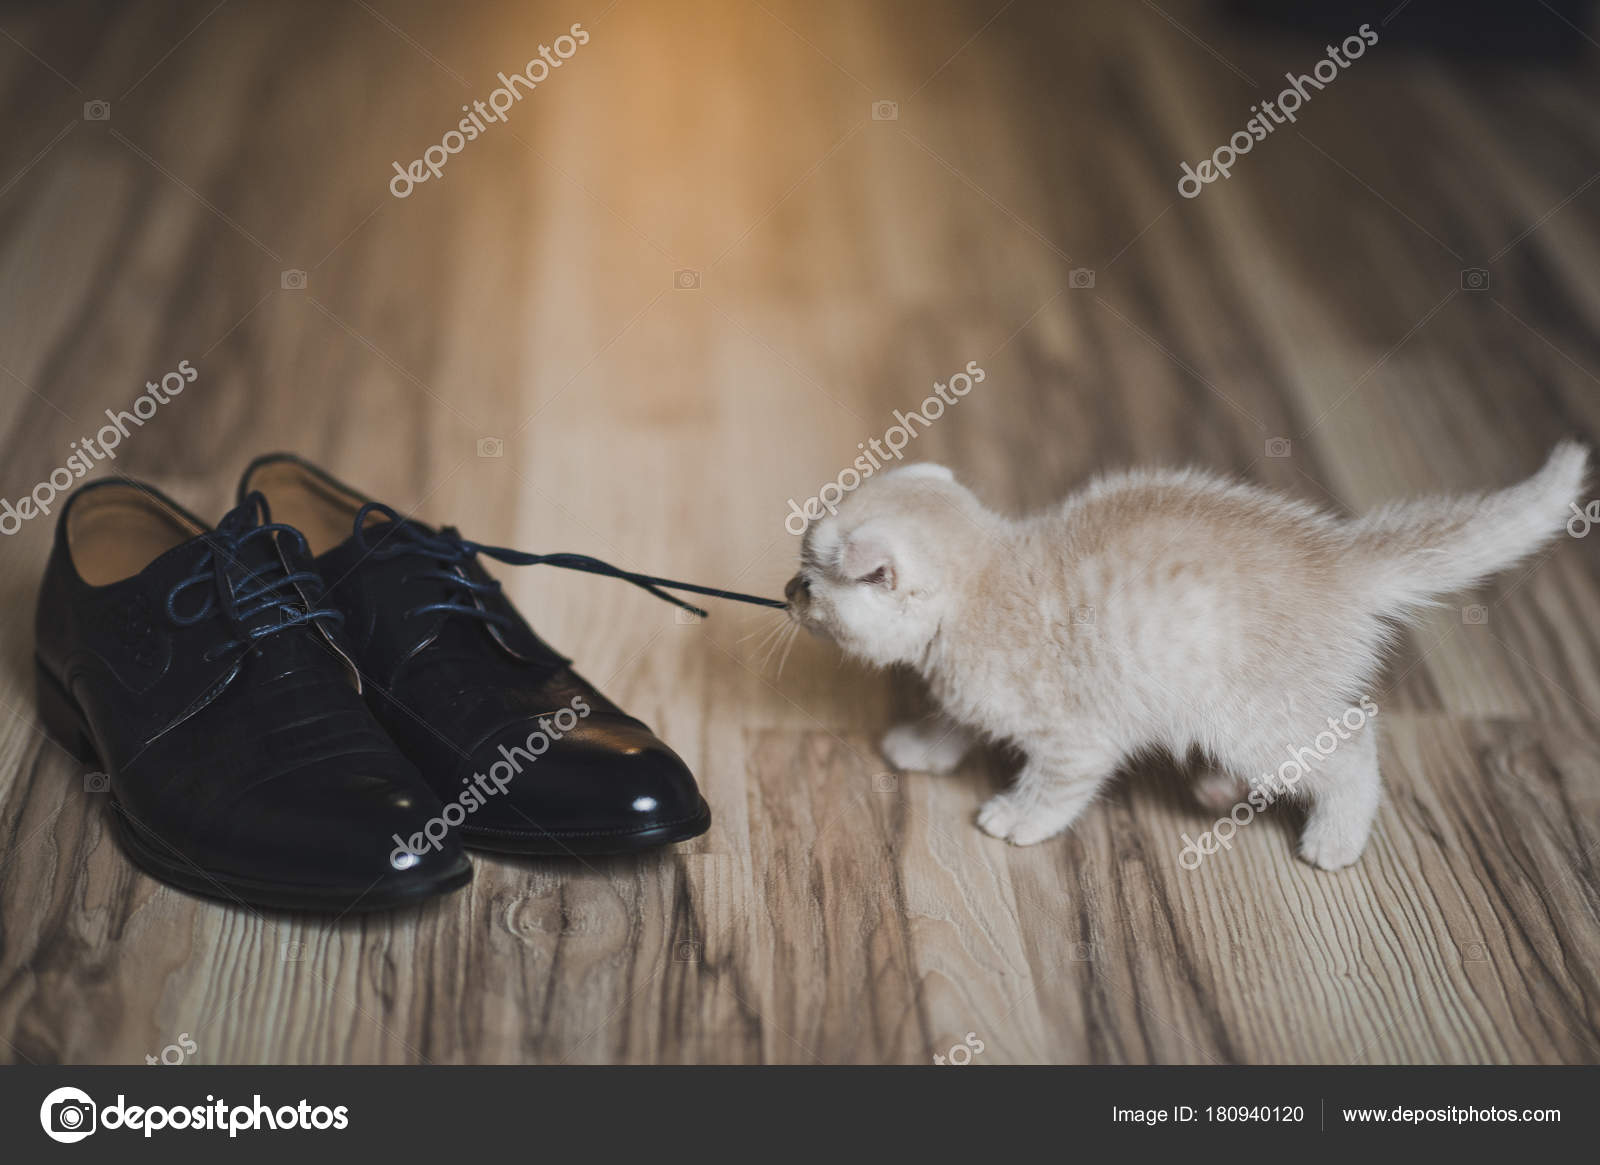 baby cat shoes